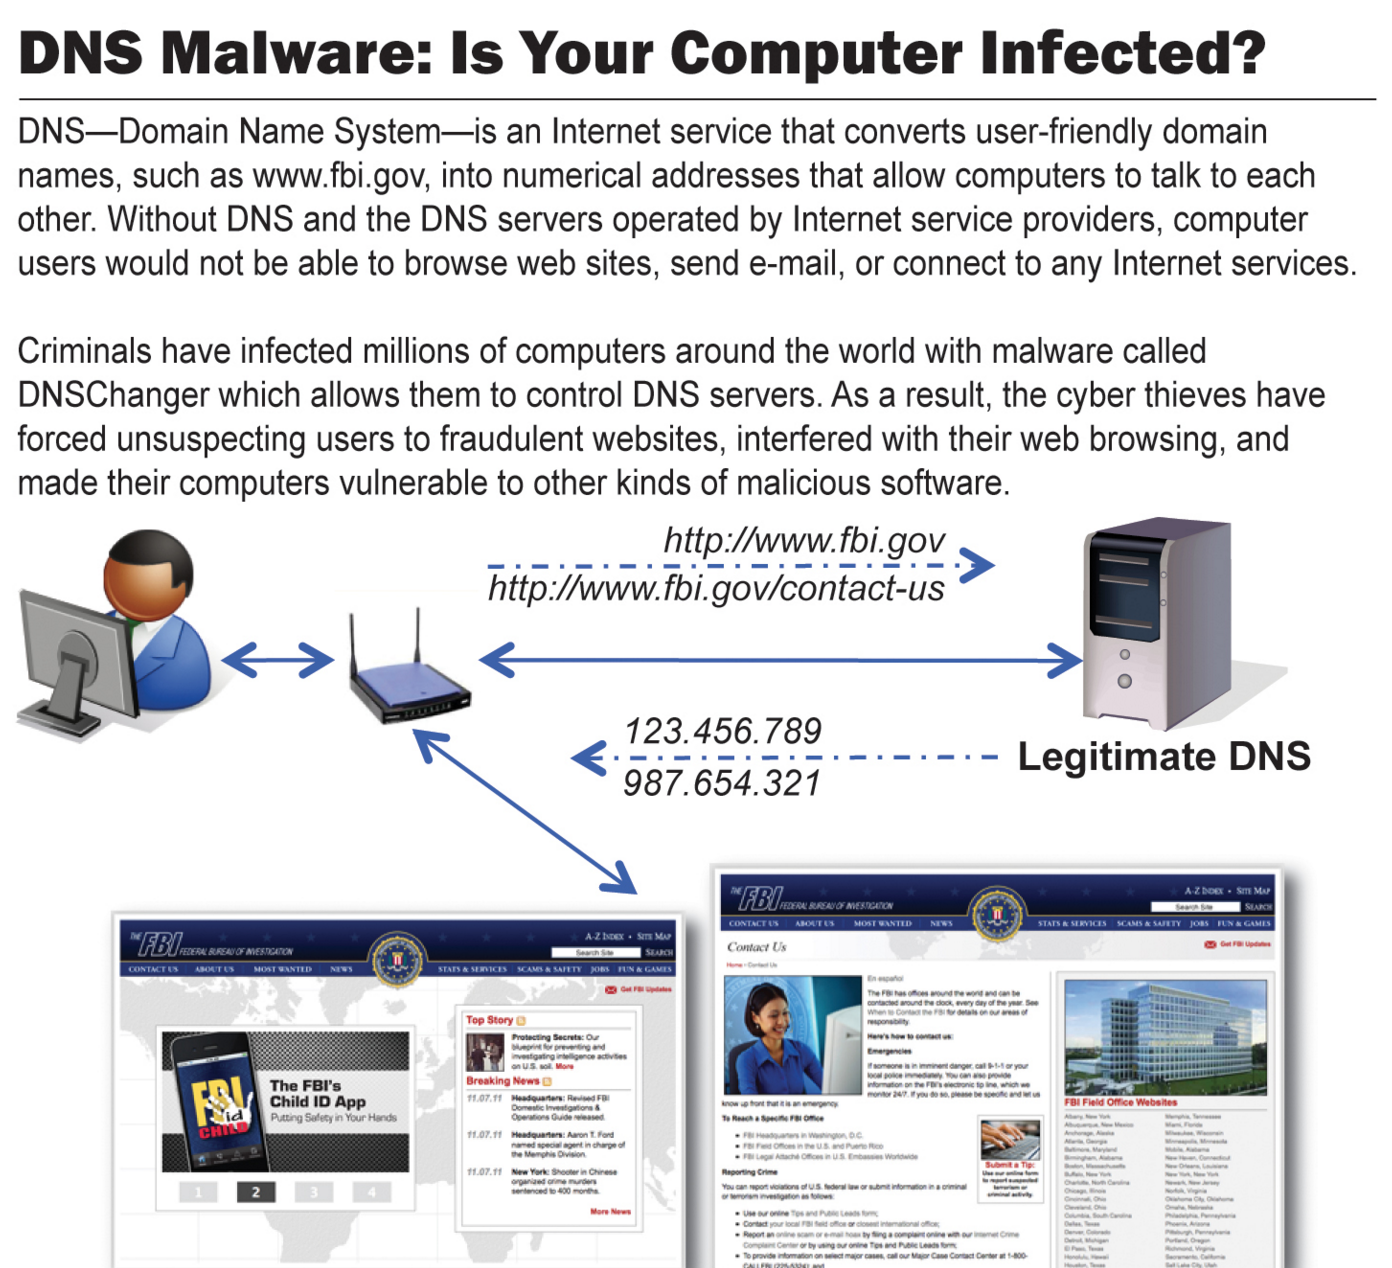 DNS-Domain Name System-is an Internet service that converts user-friendly domain names, such as www.fbi.gov, into numerical addresses that allow computers to talk to each other. Without DNS and the DNS servers operated by Internet service providers, computer users would not be able to browse websites, send e-mail, or connect to any Internet services.